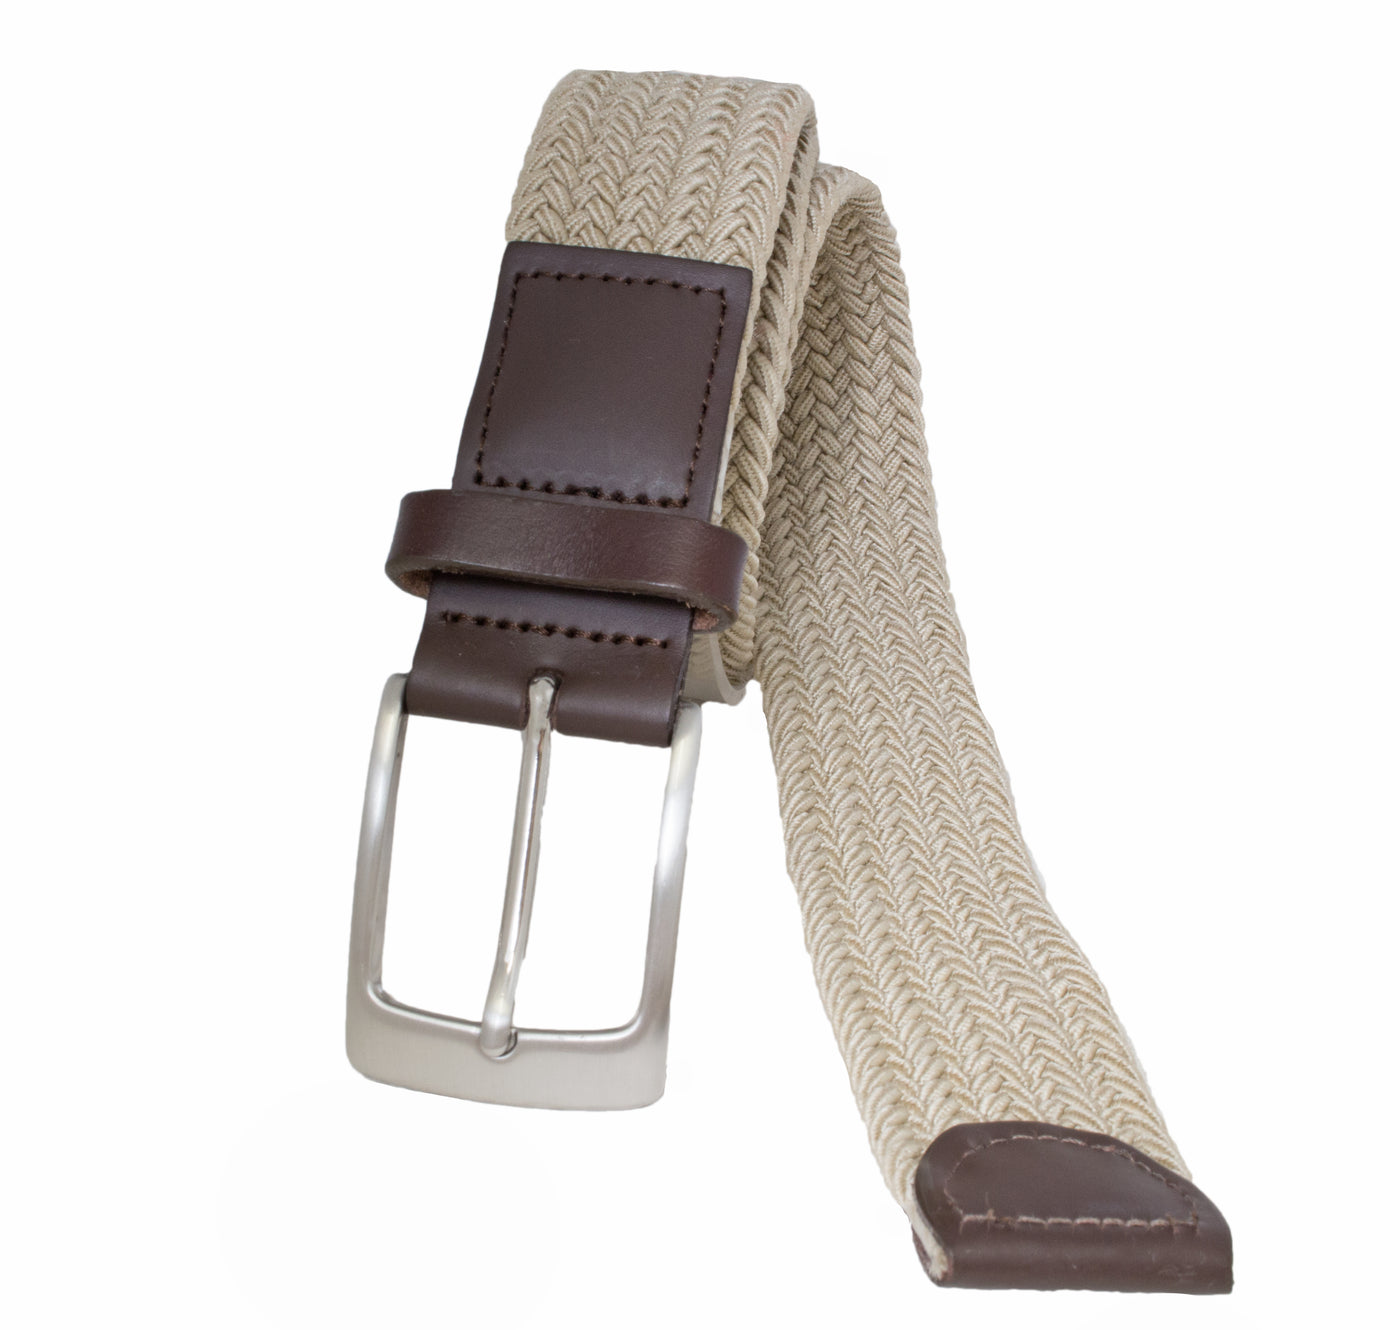 Woven Golf Belts - Limited Edition